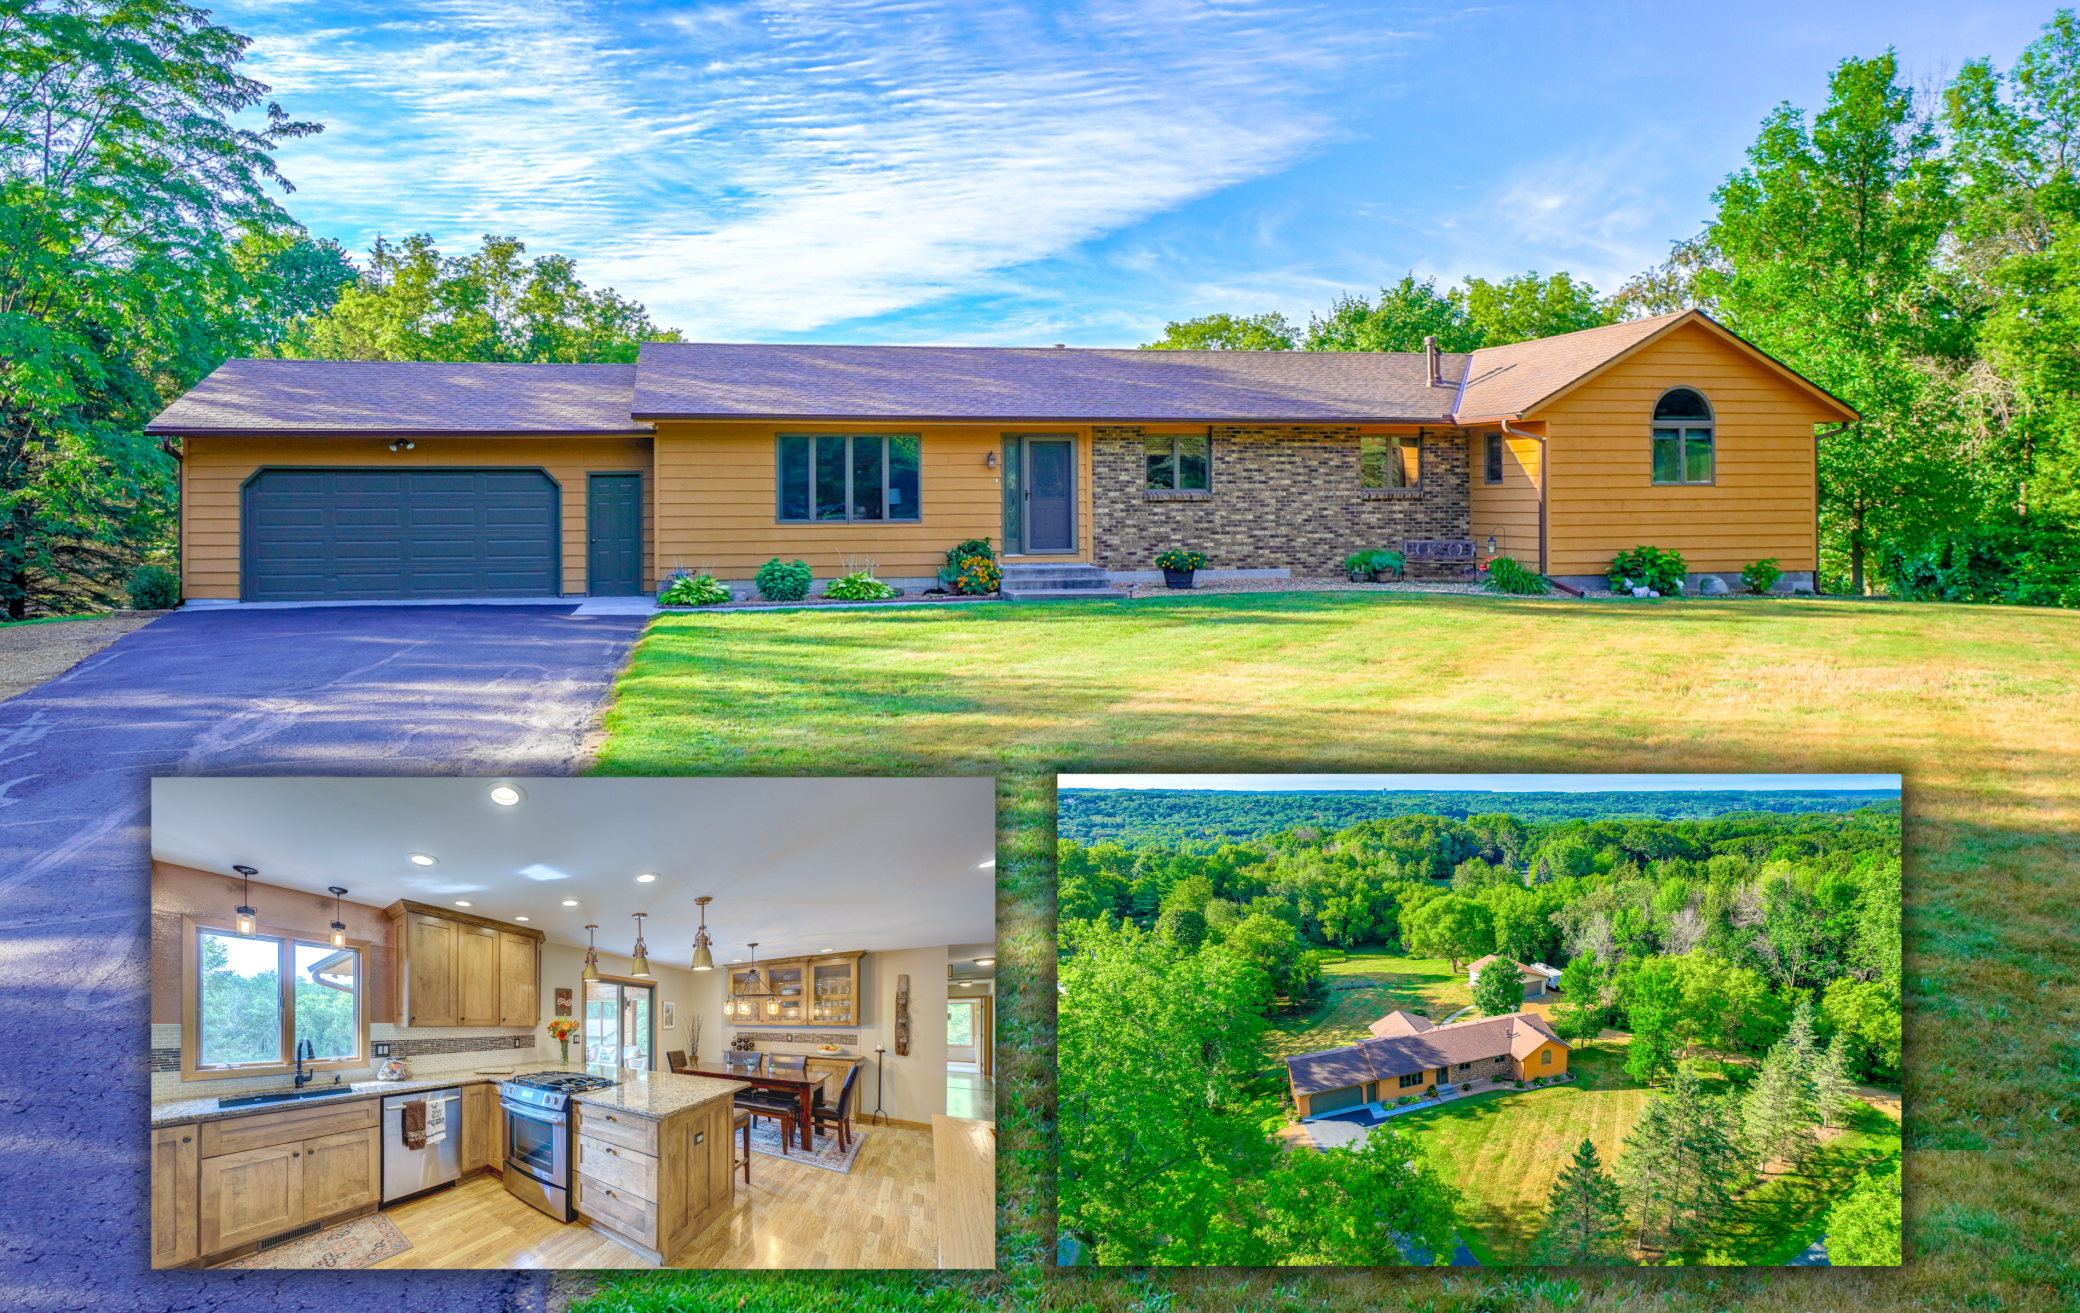 Updated 4-bedroom home sitting on 2.73 acres in a sought-after Hudson neighborhood!